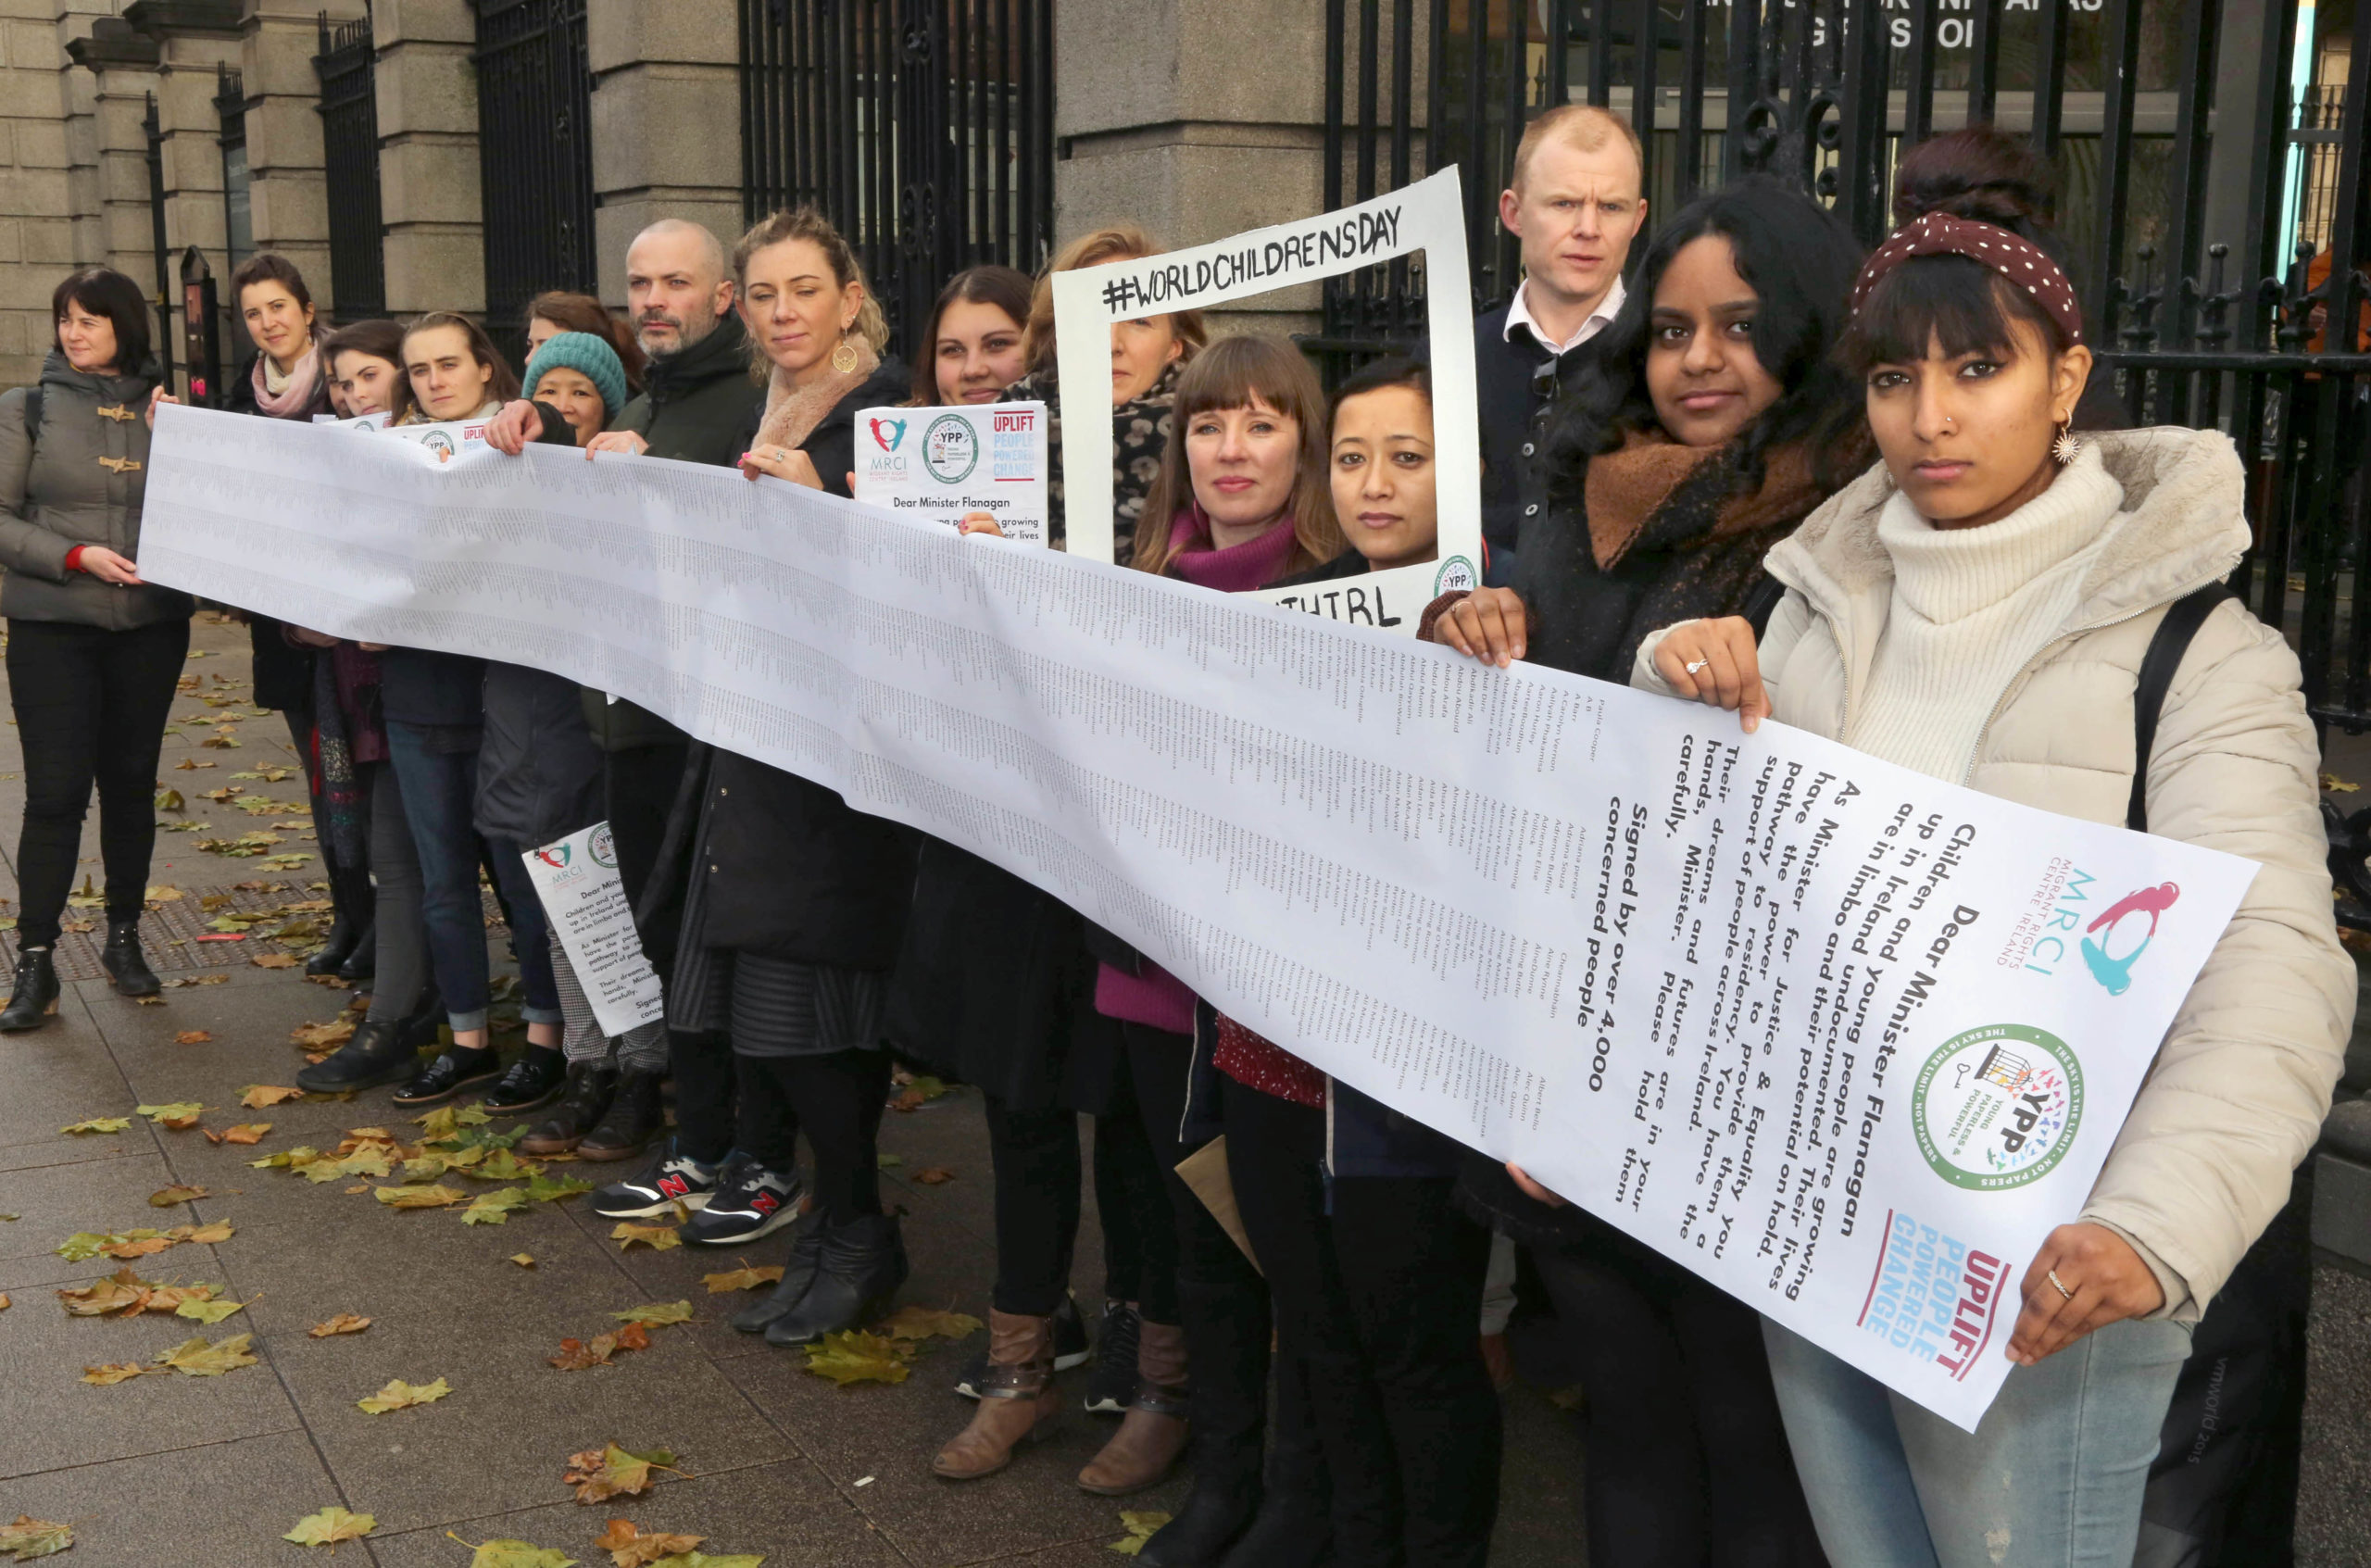 Open letter shows huge public support for undocumented children in Ireland